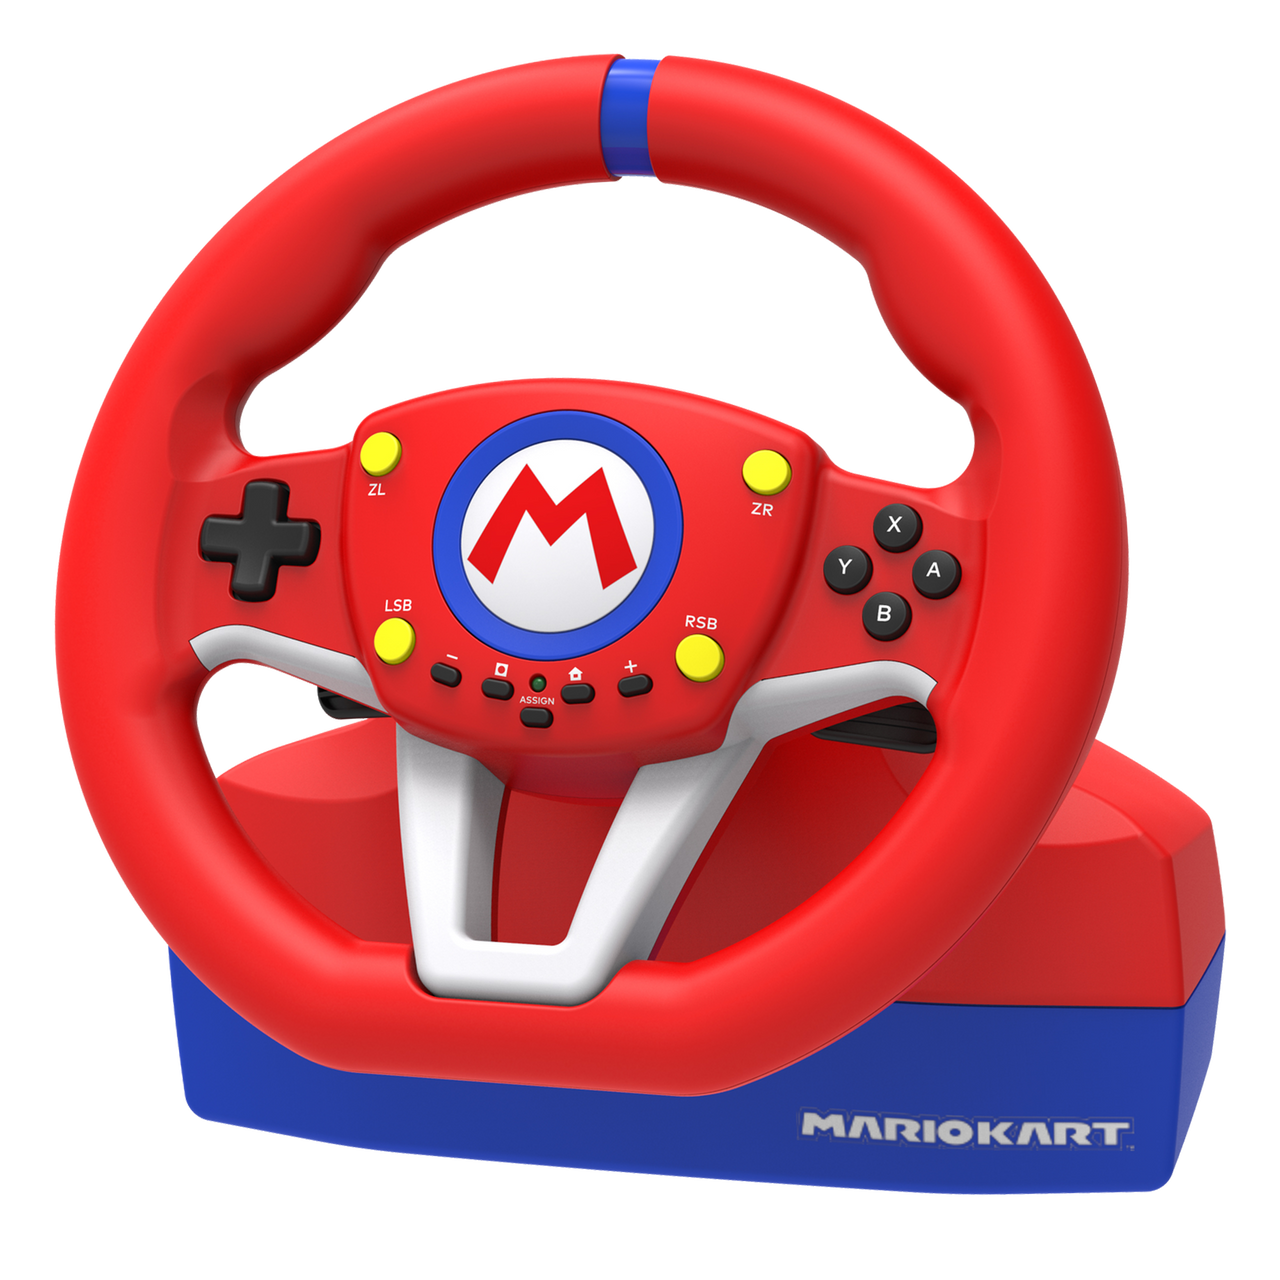 Hori Mario Kart Racing Wheel Pro Deluxe review: 'everything a